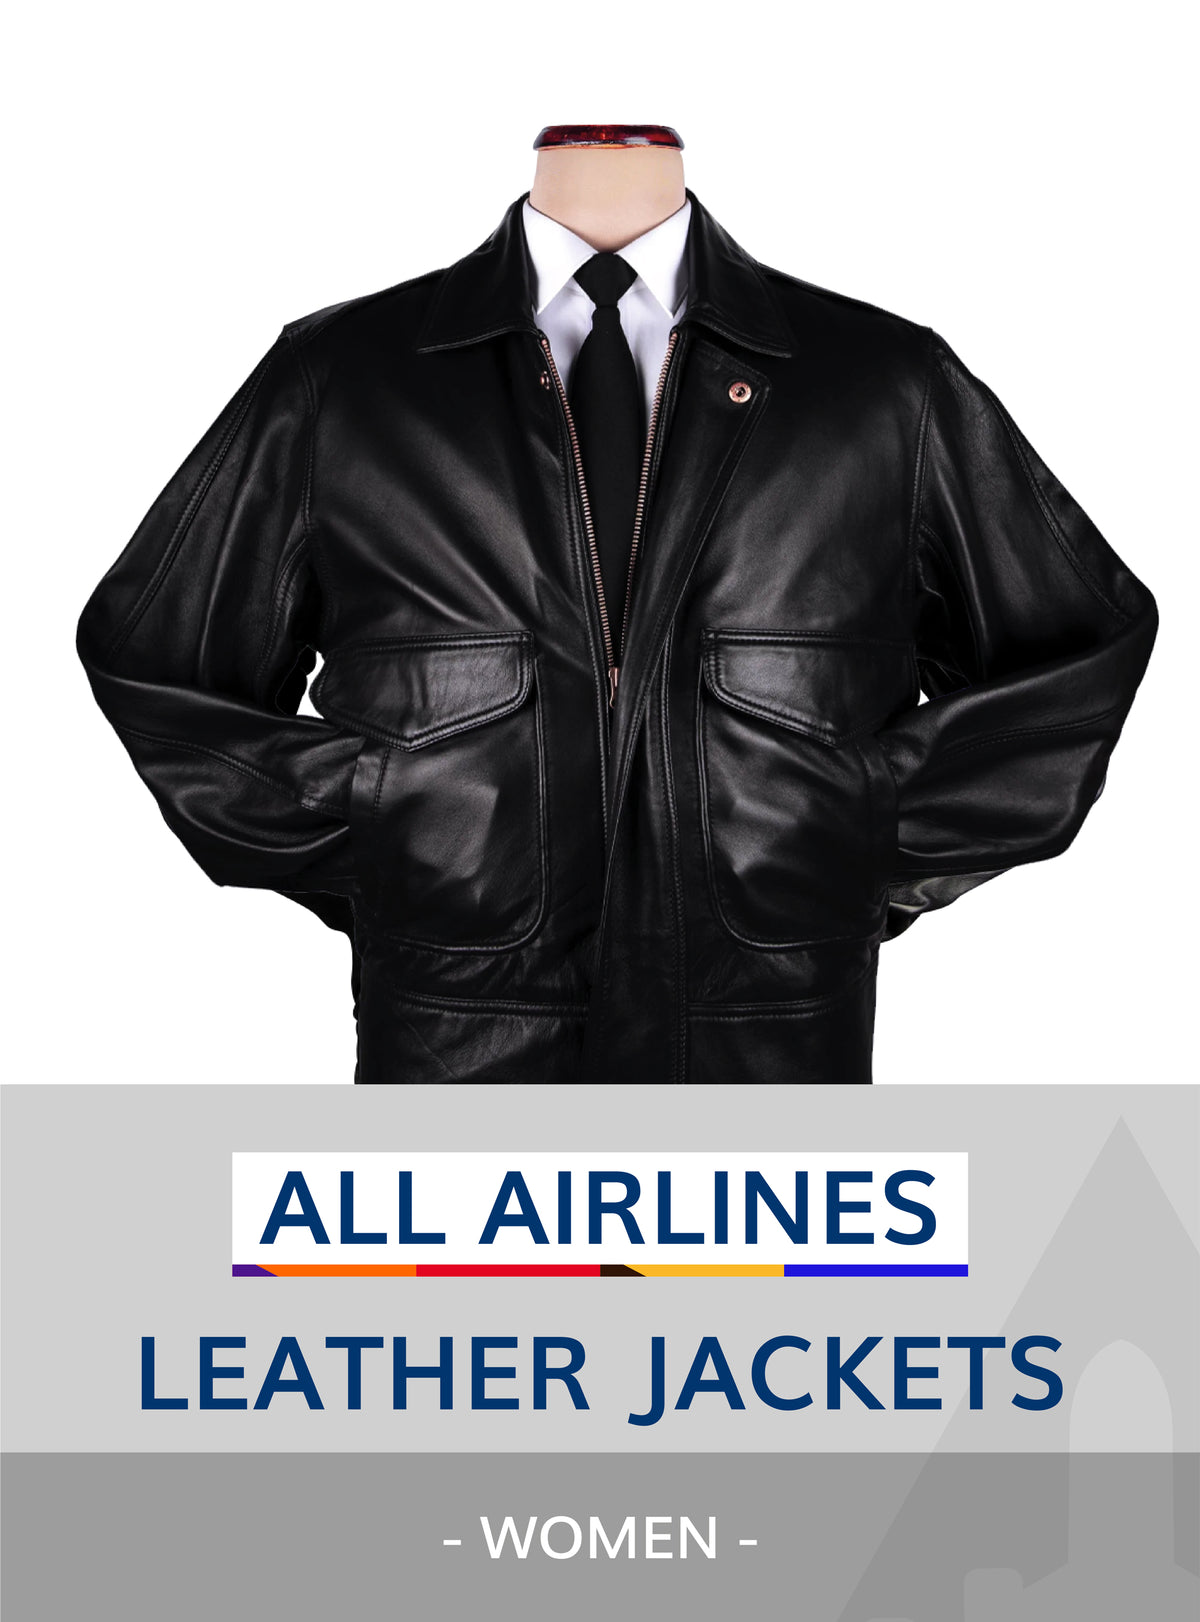 All Airlines leather jacket for women